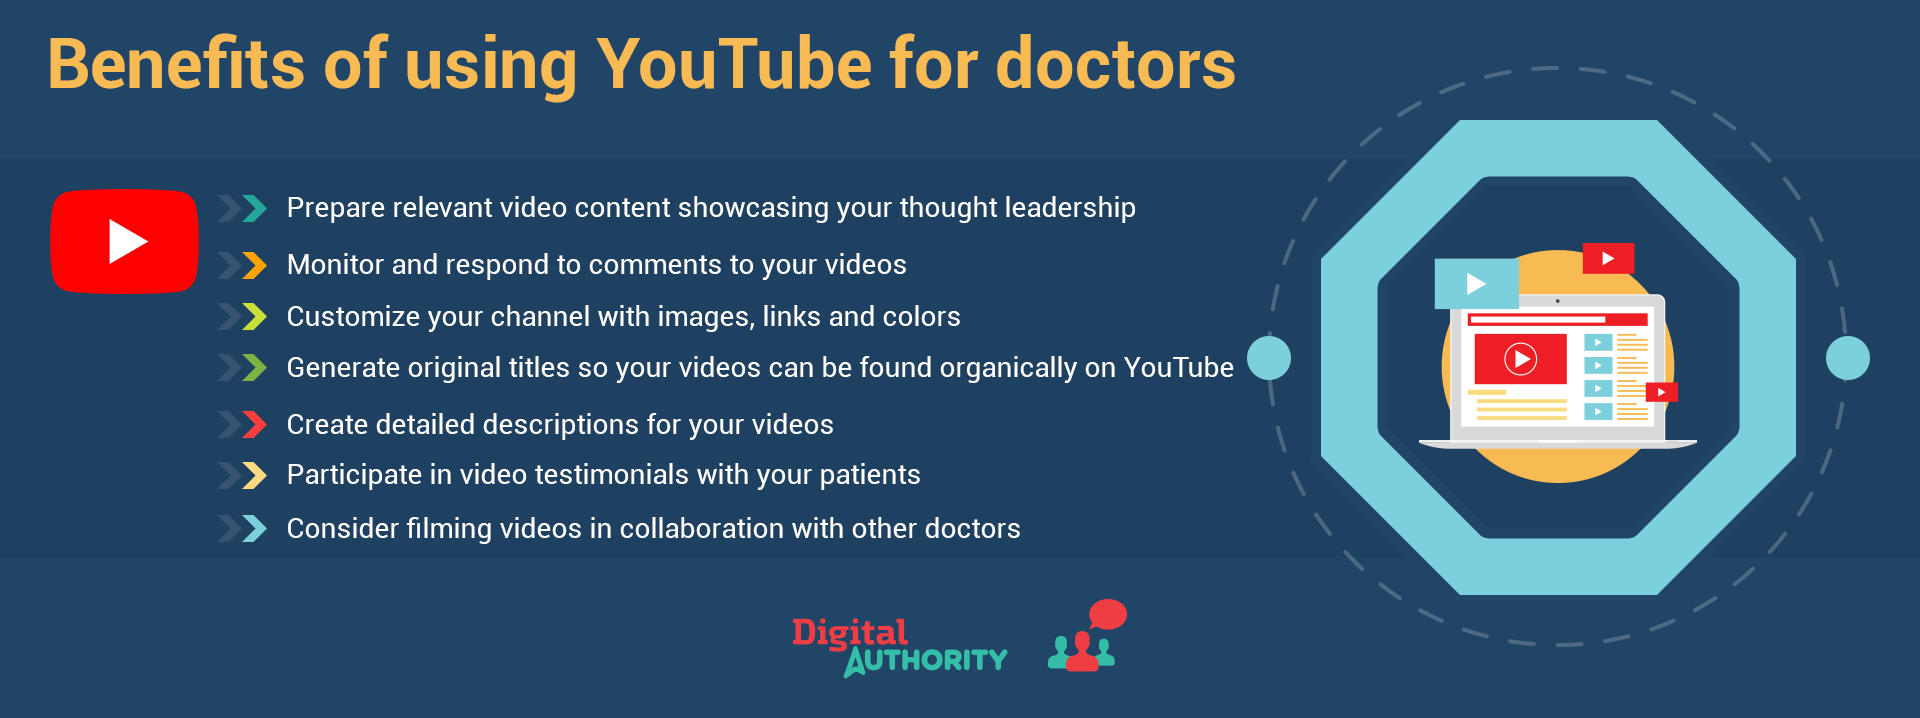 Infographic explaining the benefits of using YouTube for doctors